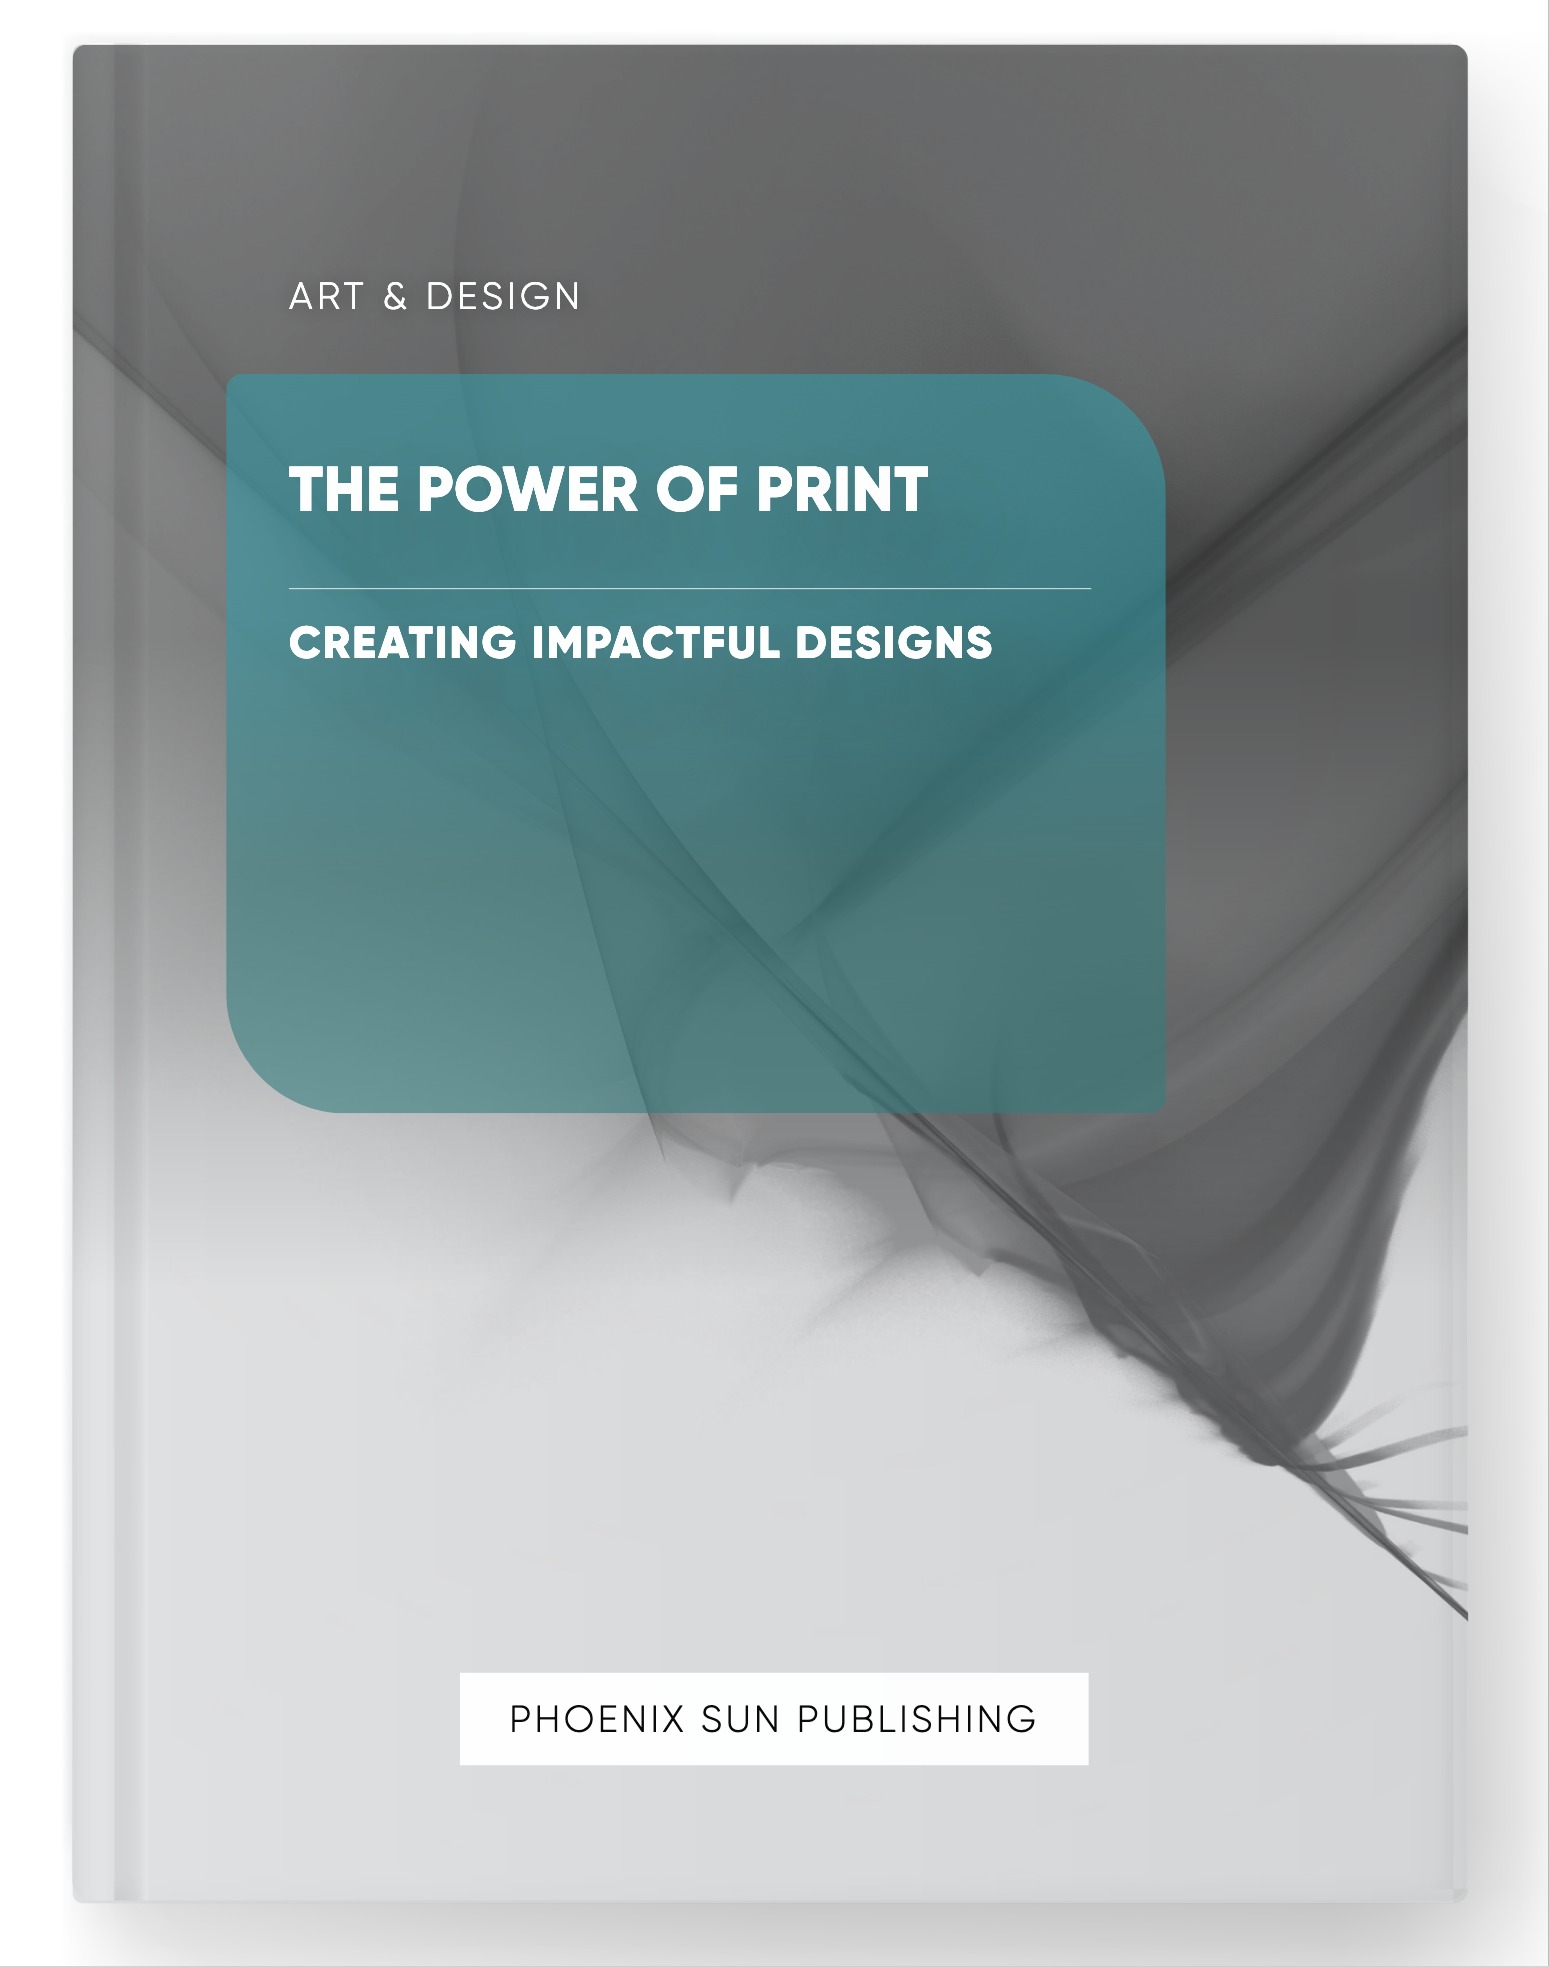 The Power of Print – Creating Impactful Designs